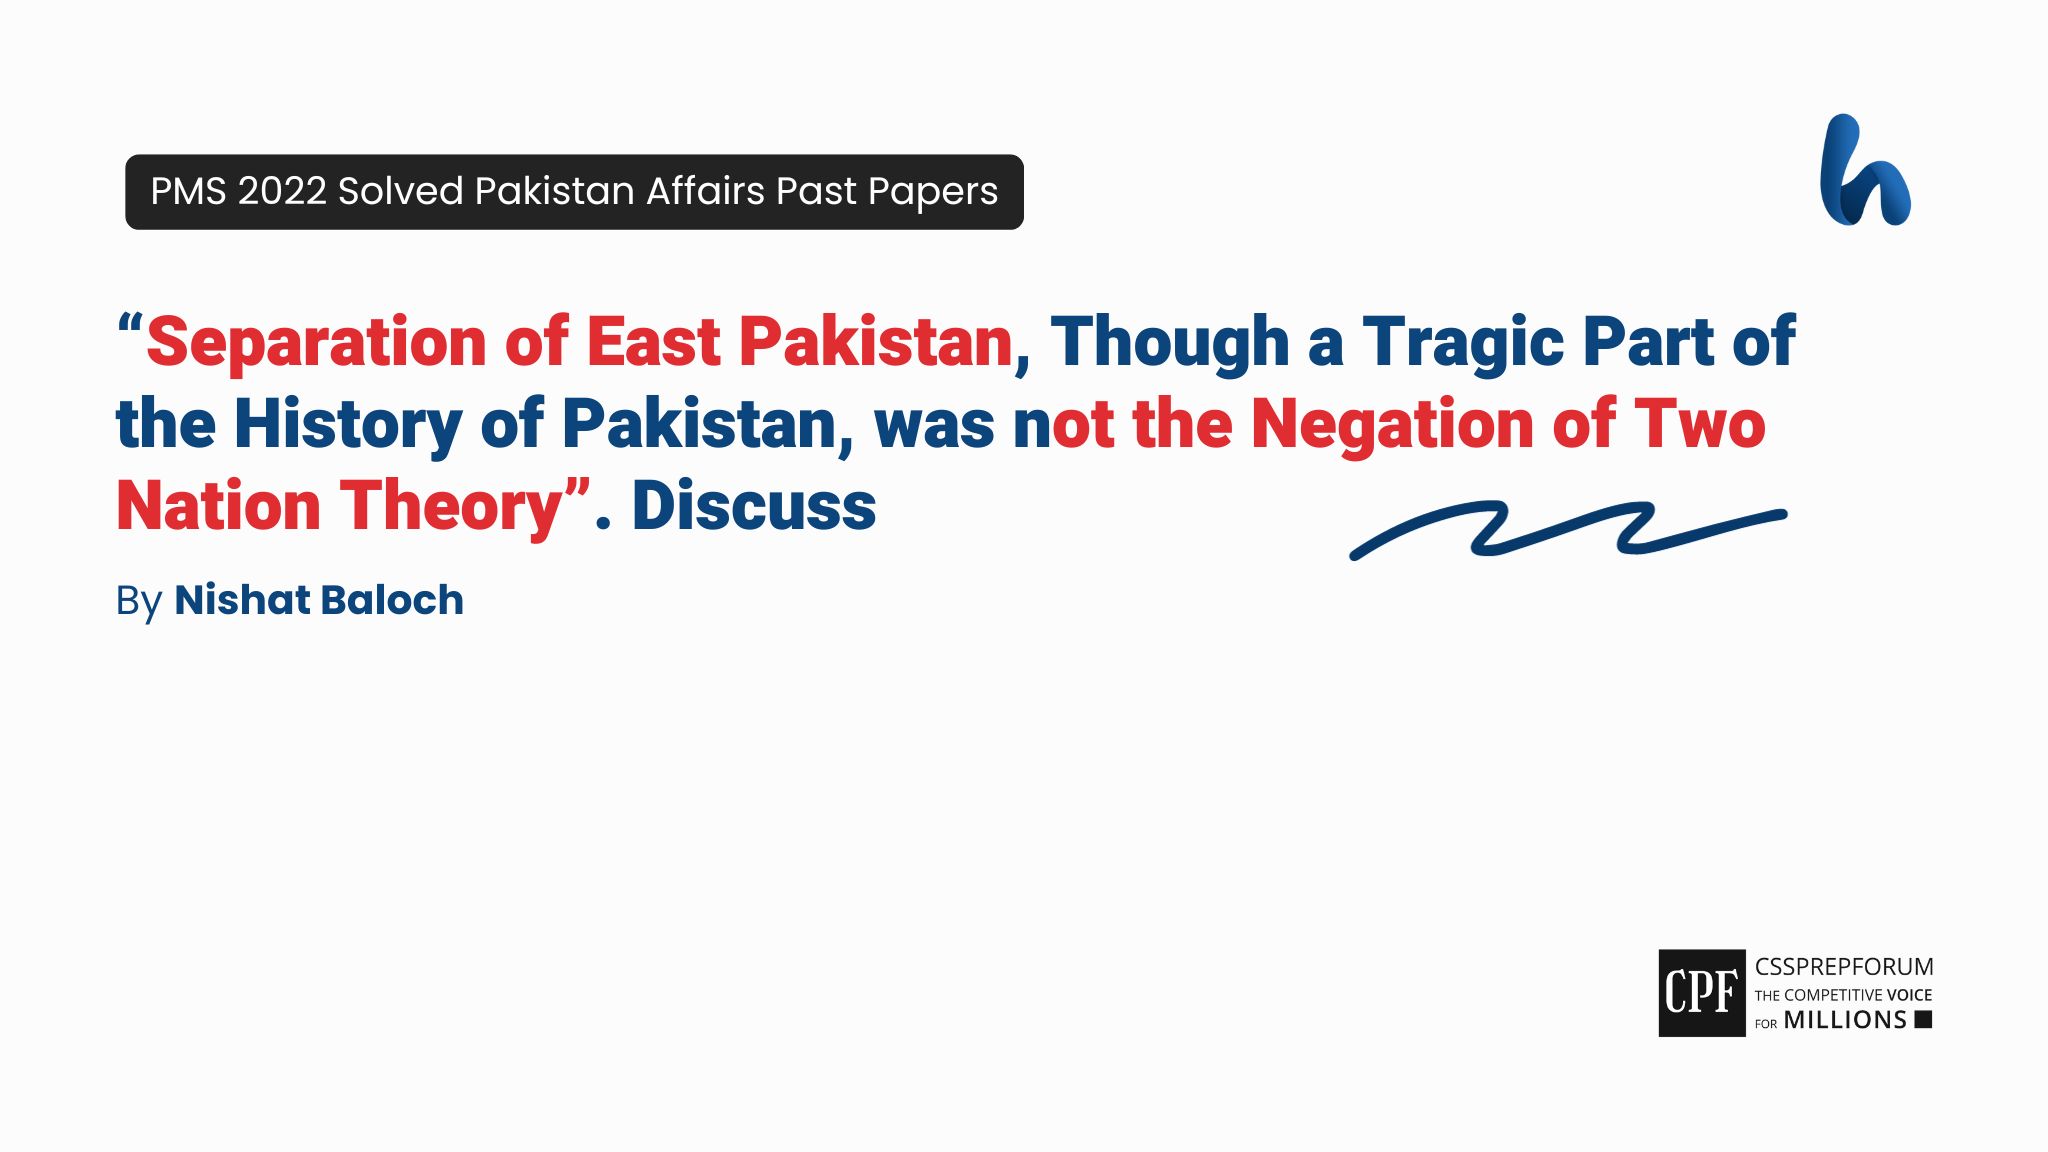 “Separation of East Pakistan, Though a Tragic Part of the History of Pakistan, was not the Negation of Two Nation Theory”. Discuss